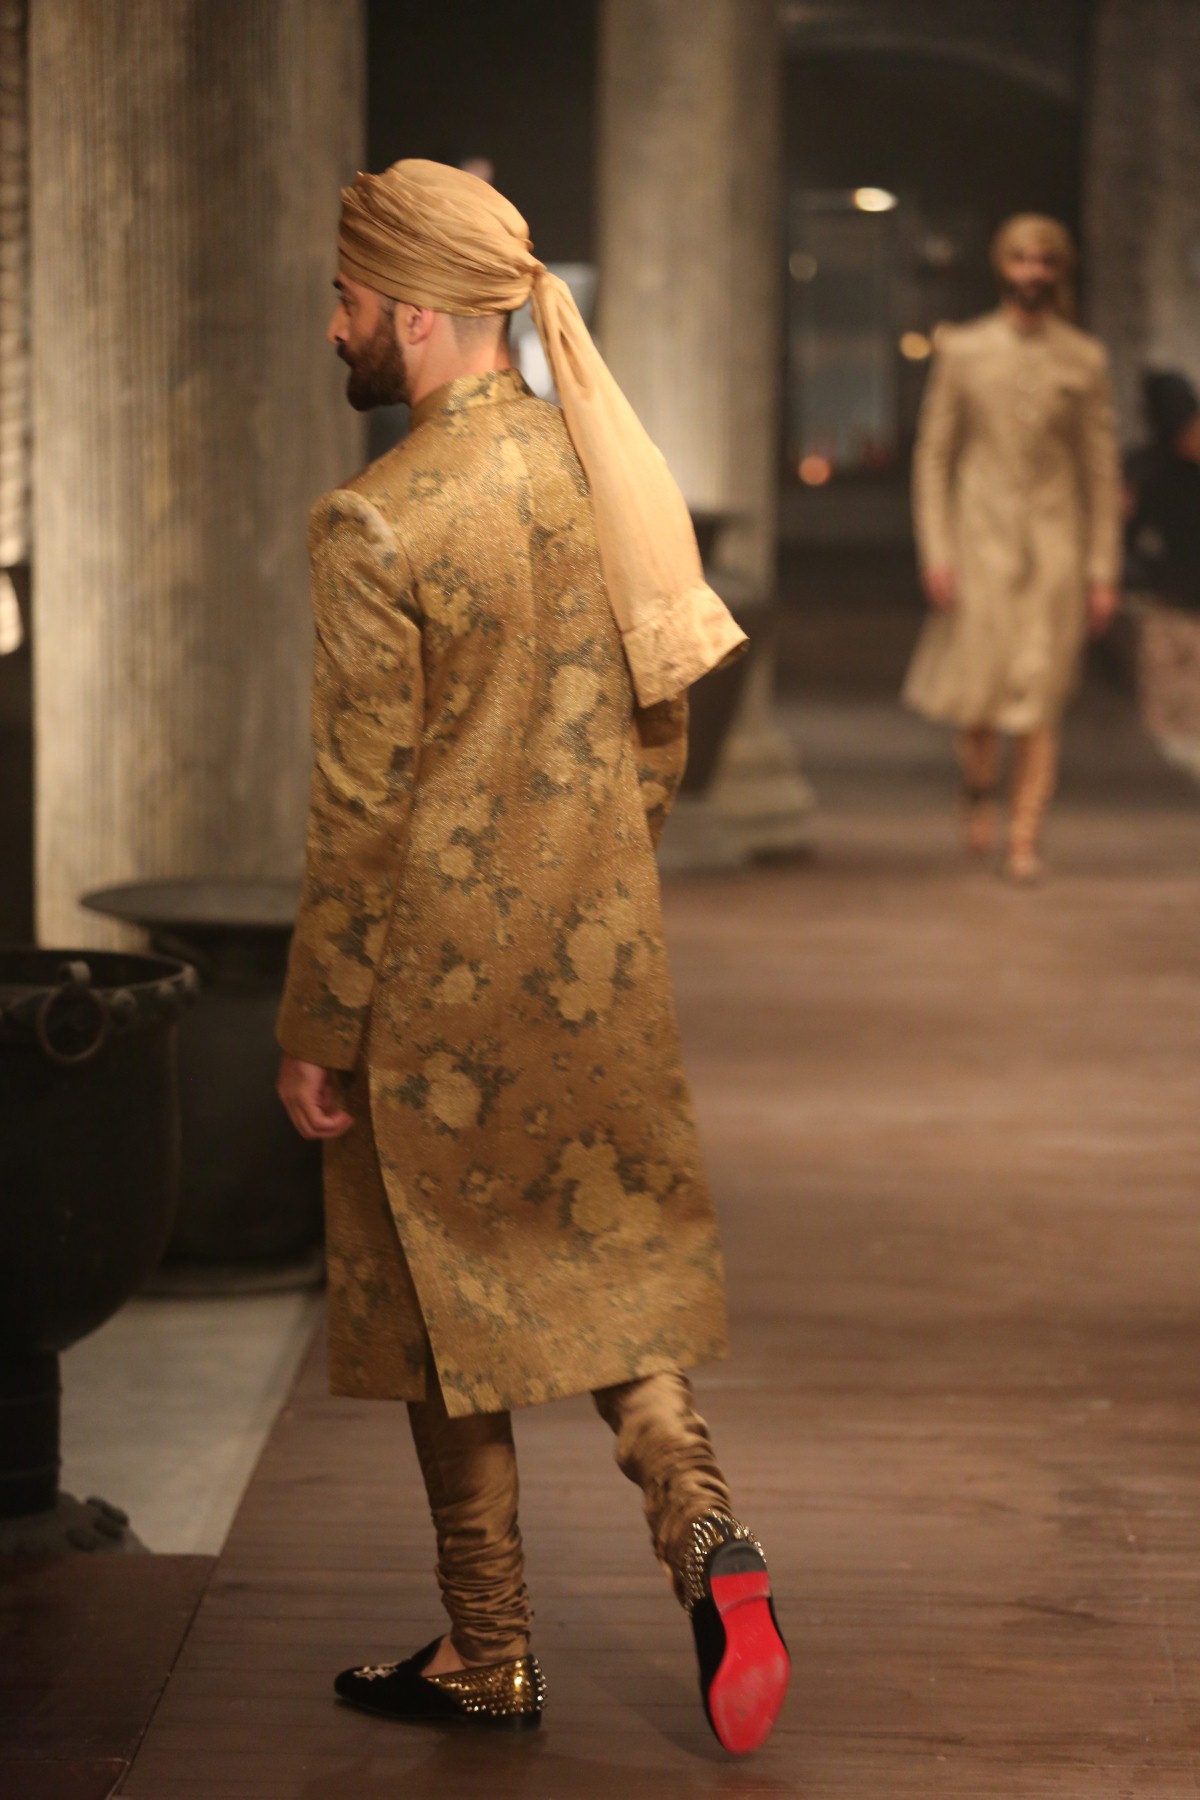 fwd-life-sabyasachi-and-christian-louboutin-ramp-images-for-the-firdaus-collection-and-bespoke-shoes-and-handbags-5